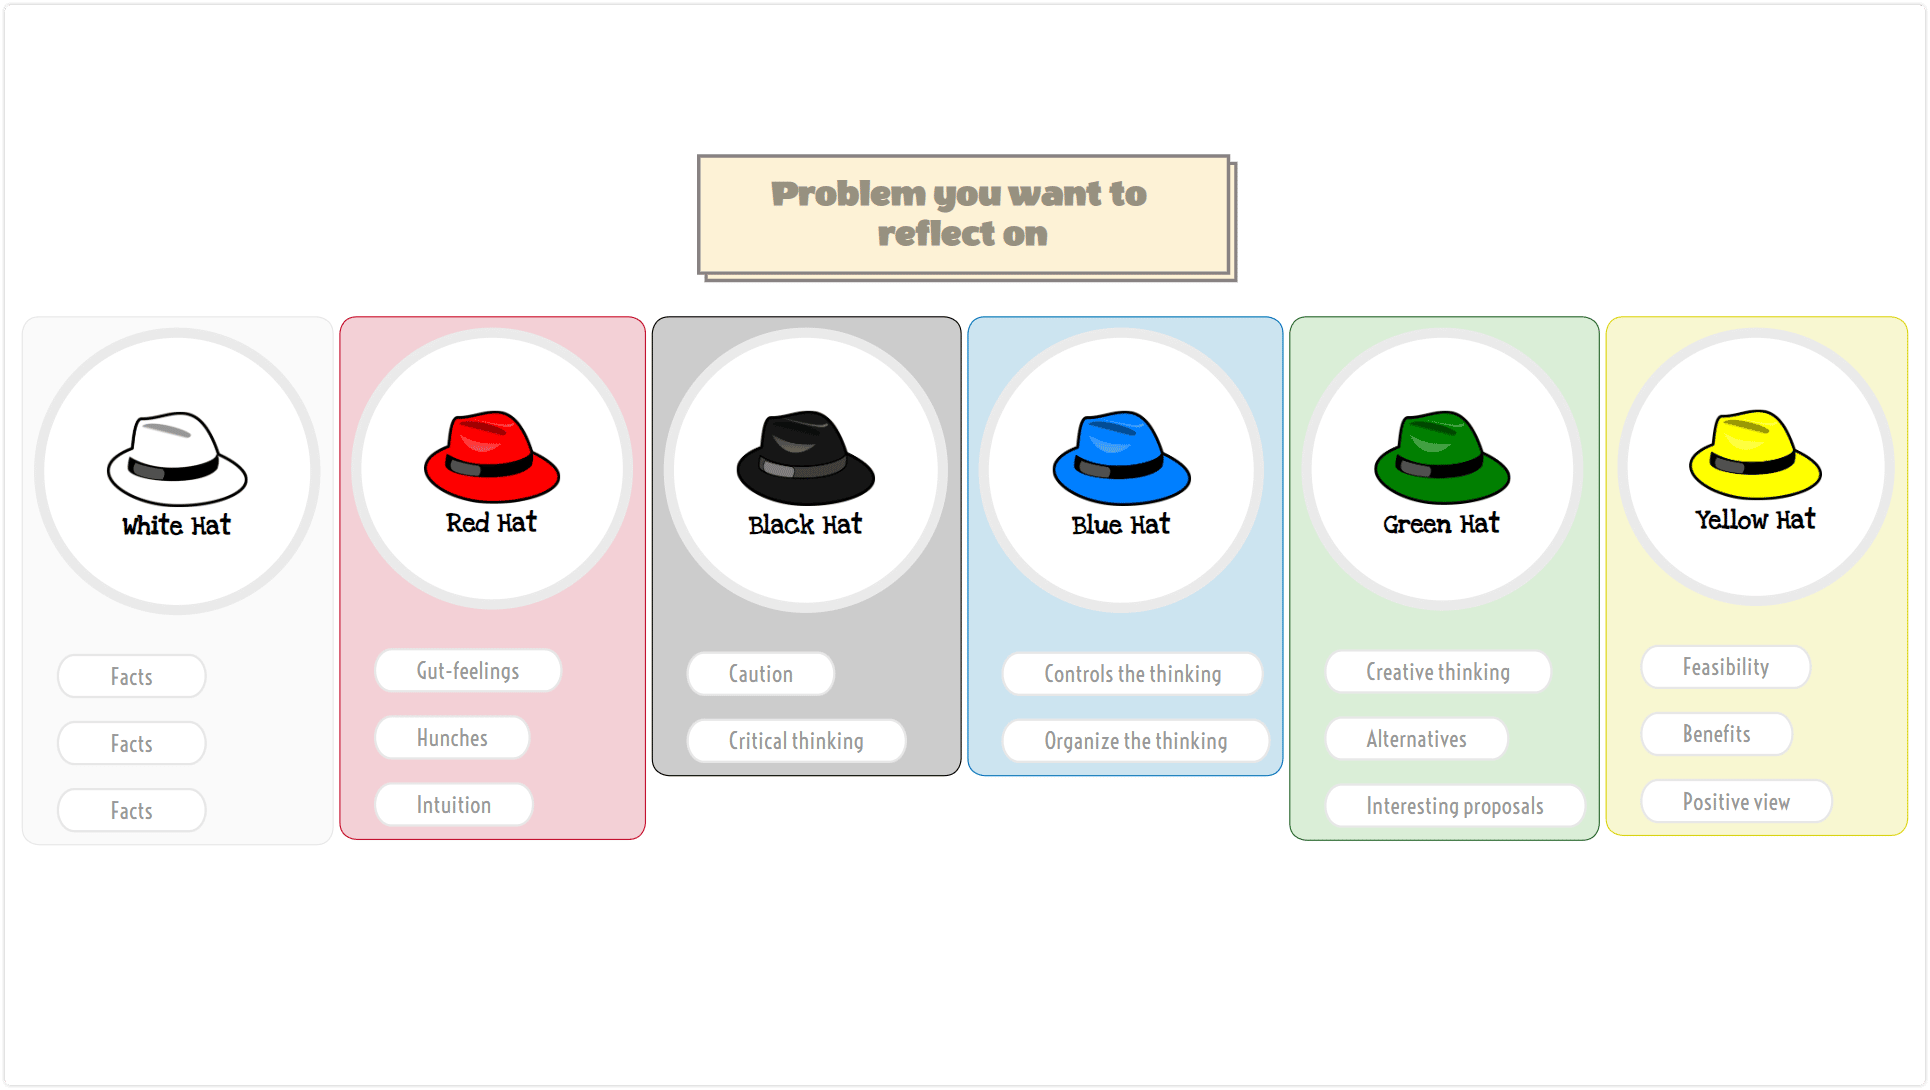 https://s3.eu-central-1.amazonaws.com/mindomopublicstore/resources/Problem%20solving%20mind%20map%20-%206%20thinking%20hats%20template.png